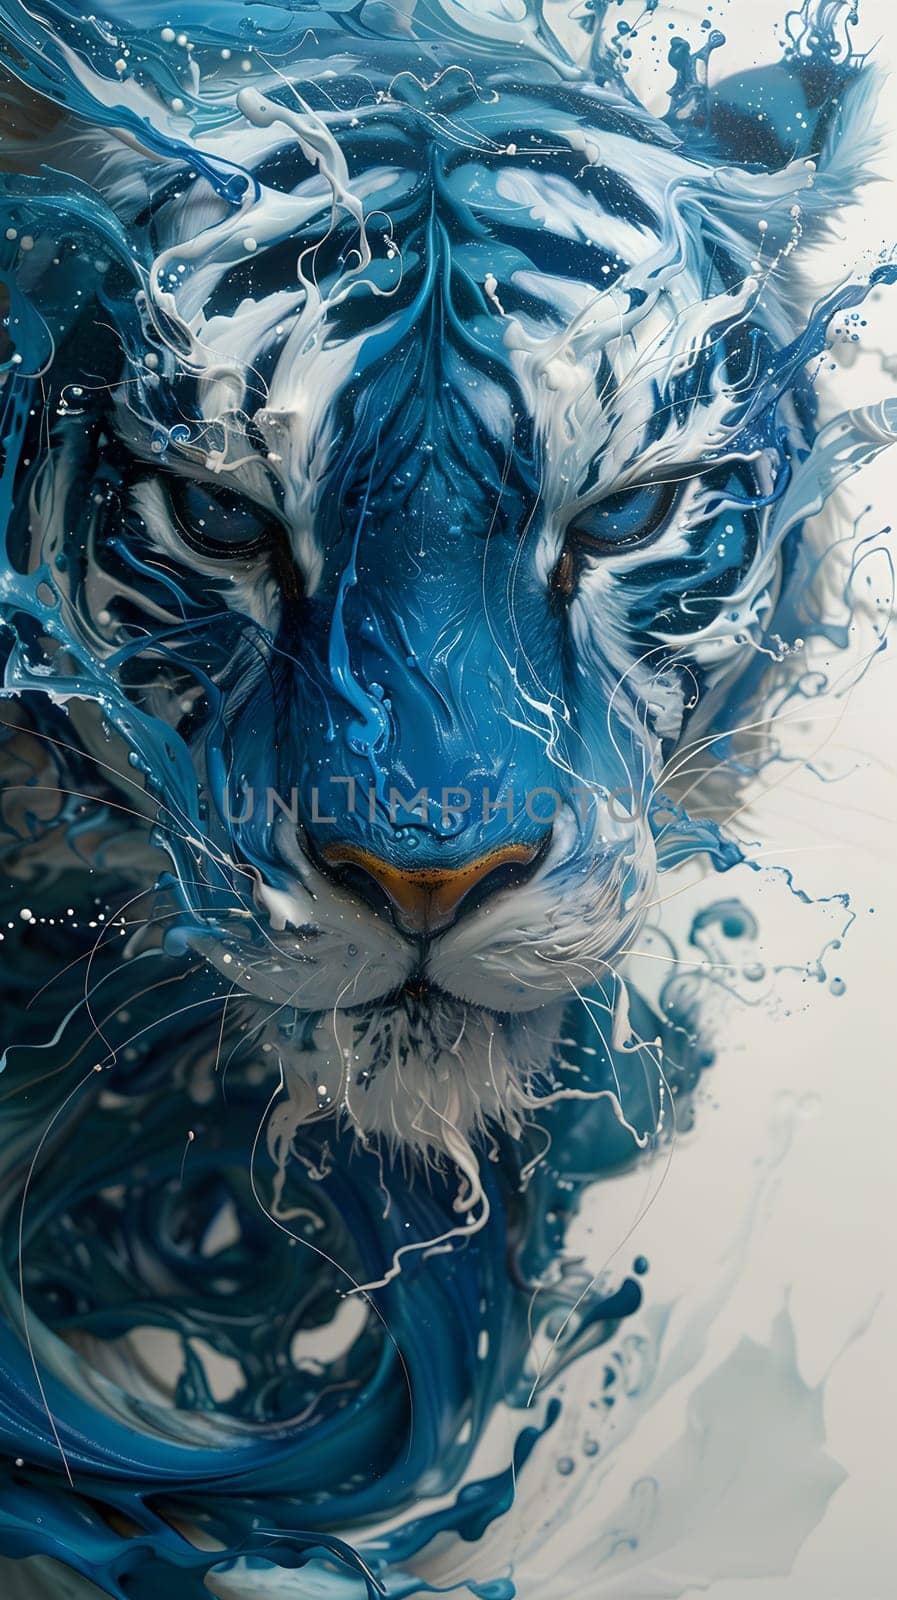 A stunning painting of an electric blue and white Siberian tiger gracefully swimming in the water. The felines Felidae features and carnivorous nature are beautifully captured in this piece of art